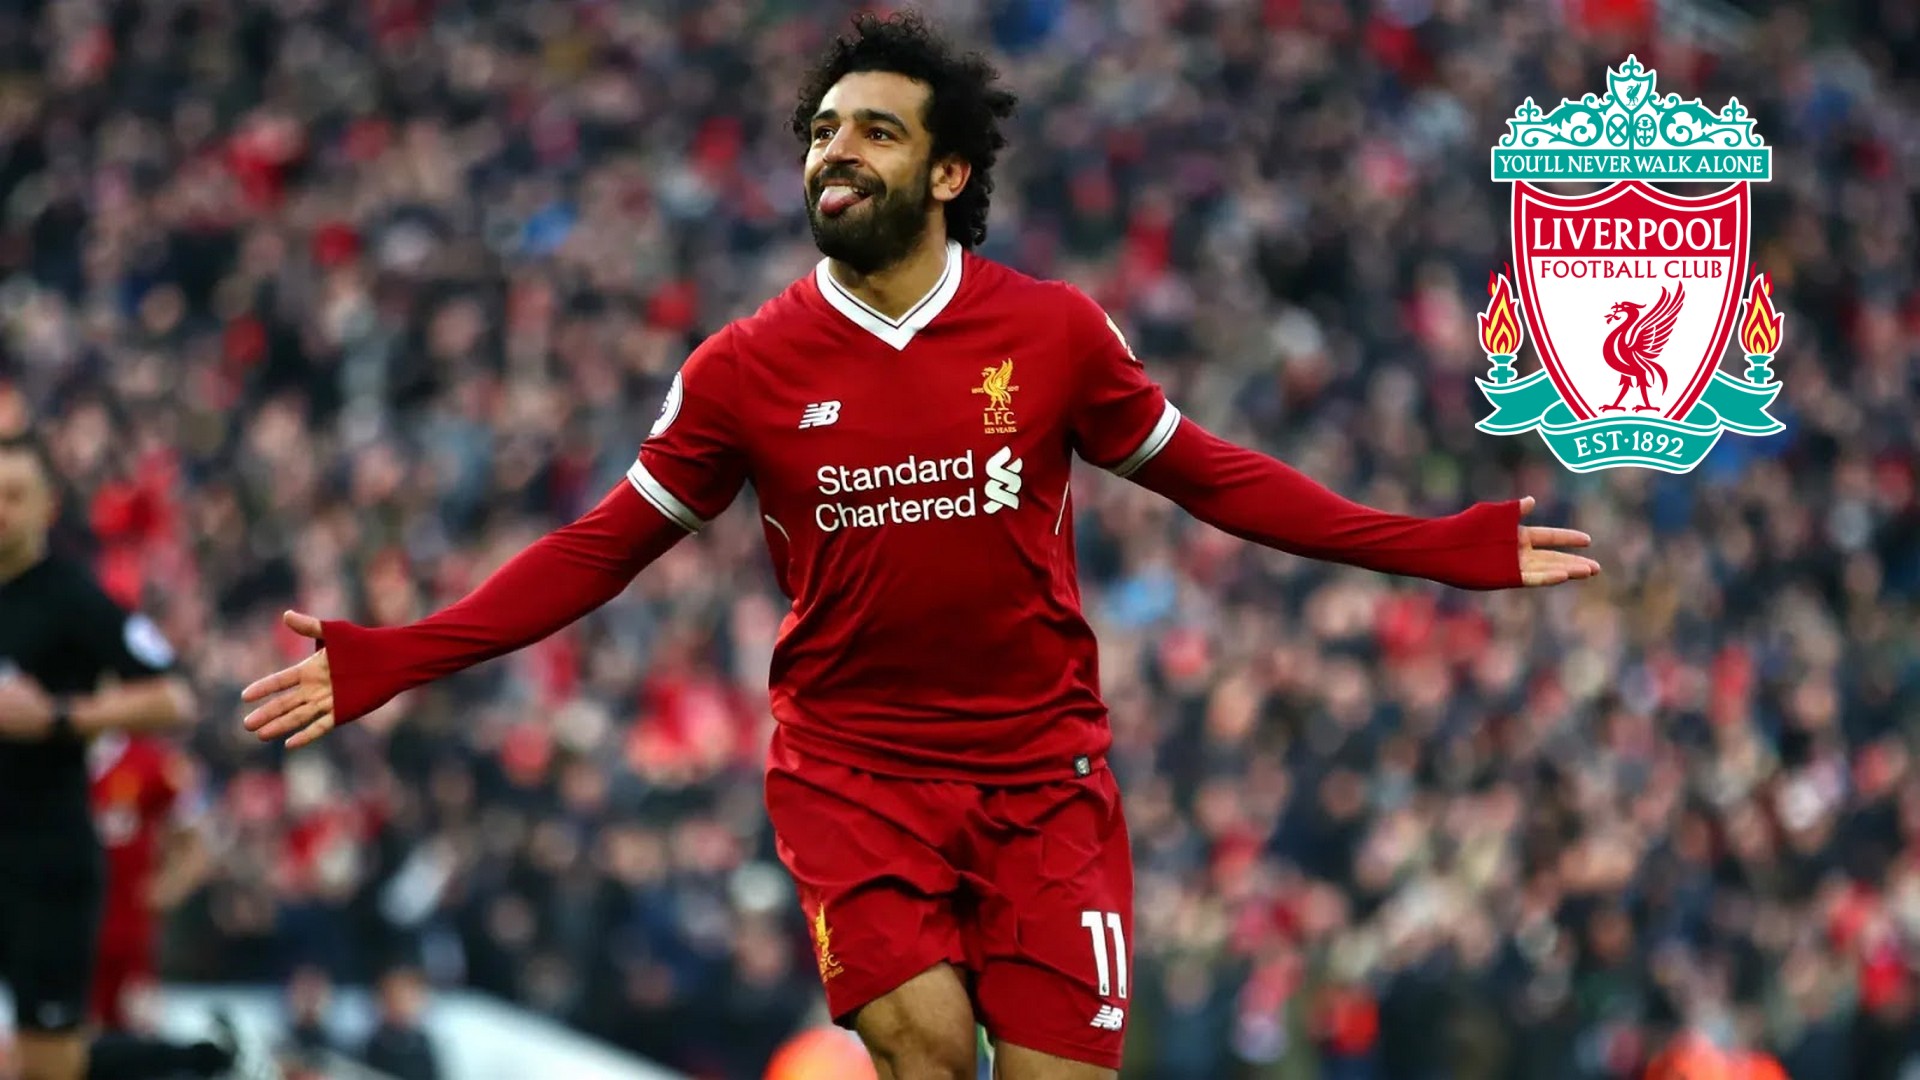 Mohamed Salah Wallpaper HD with image resolution 1920x1080 pixel. You can make this wallpaper for your Desktop Computer Backgrounds, Mac Wallpapers, Android Lock screen or iPhone Screensavers